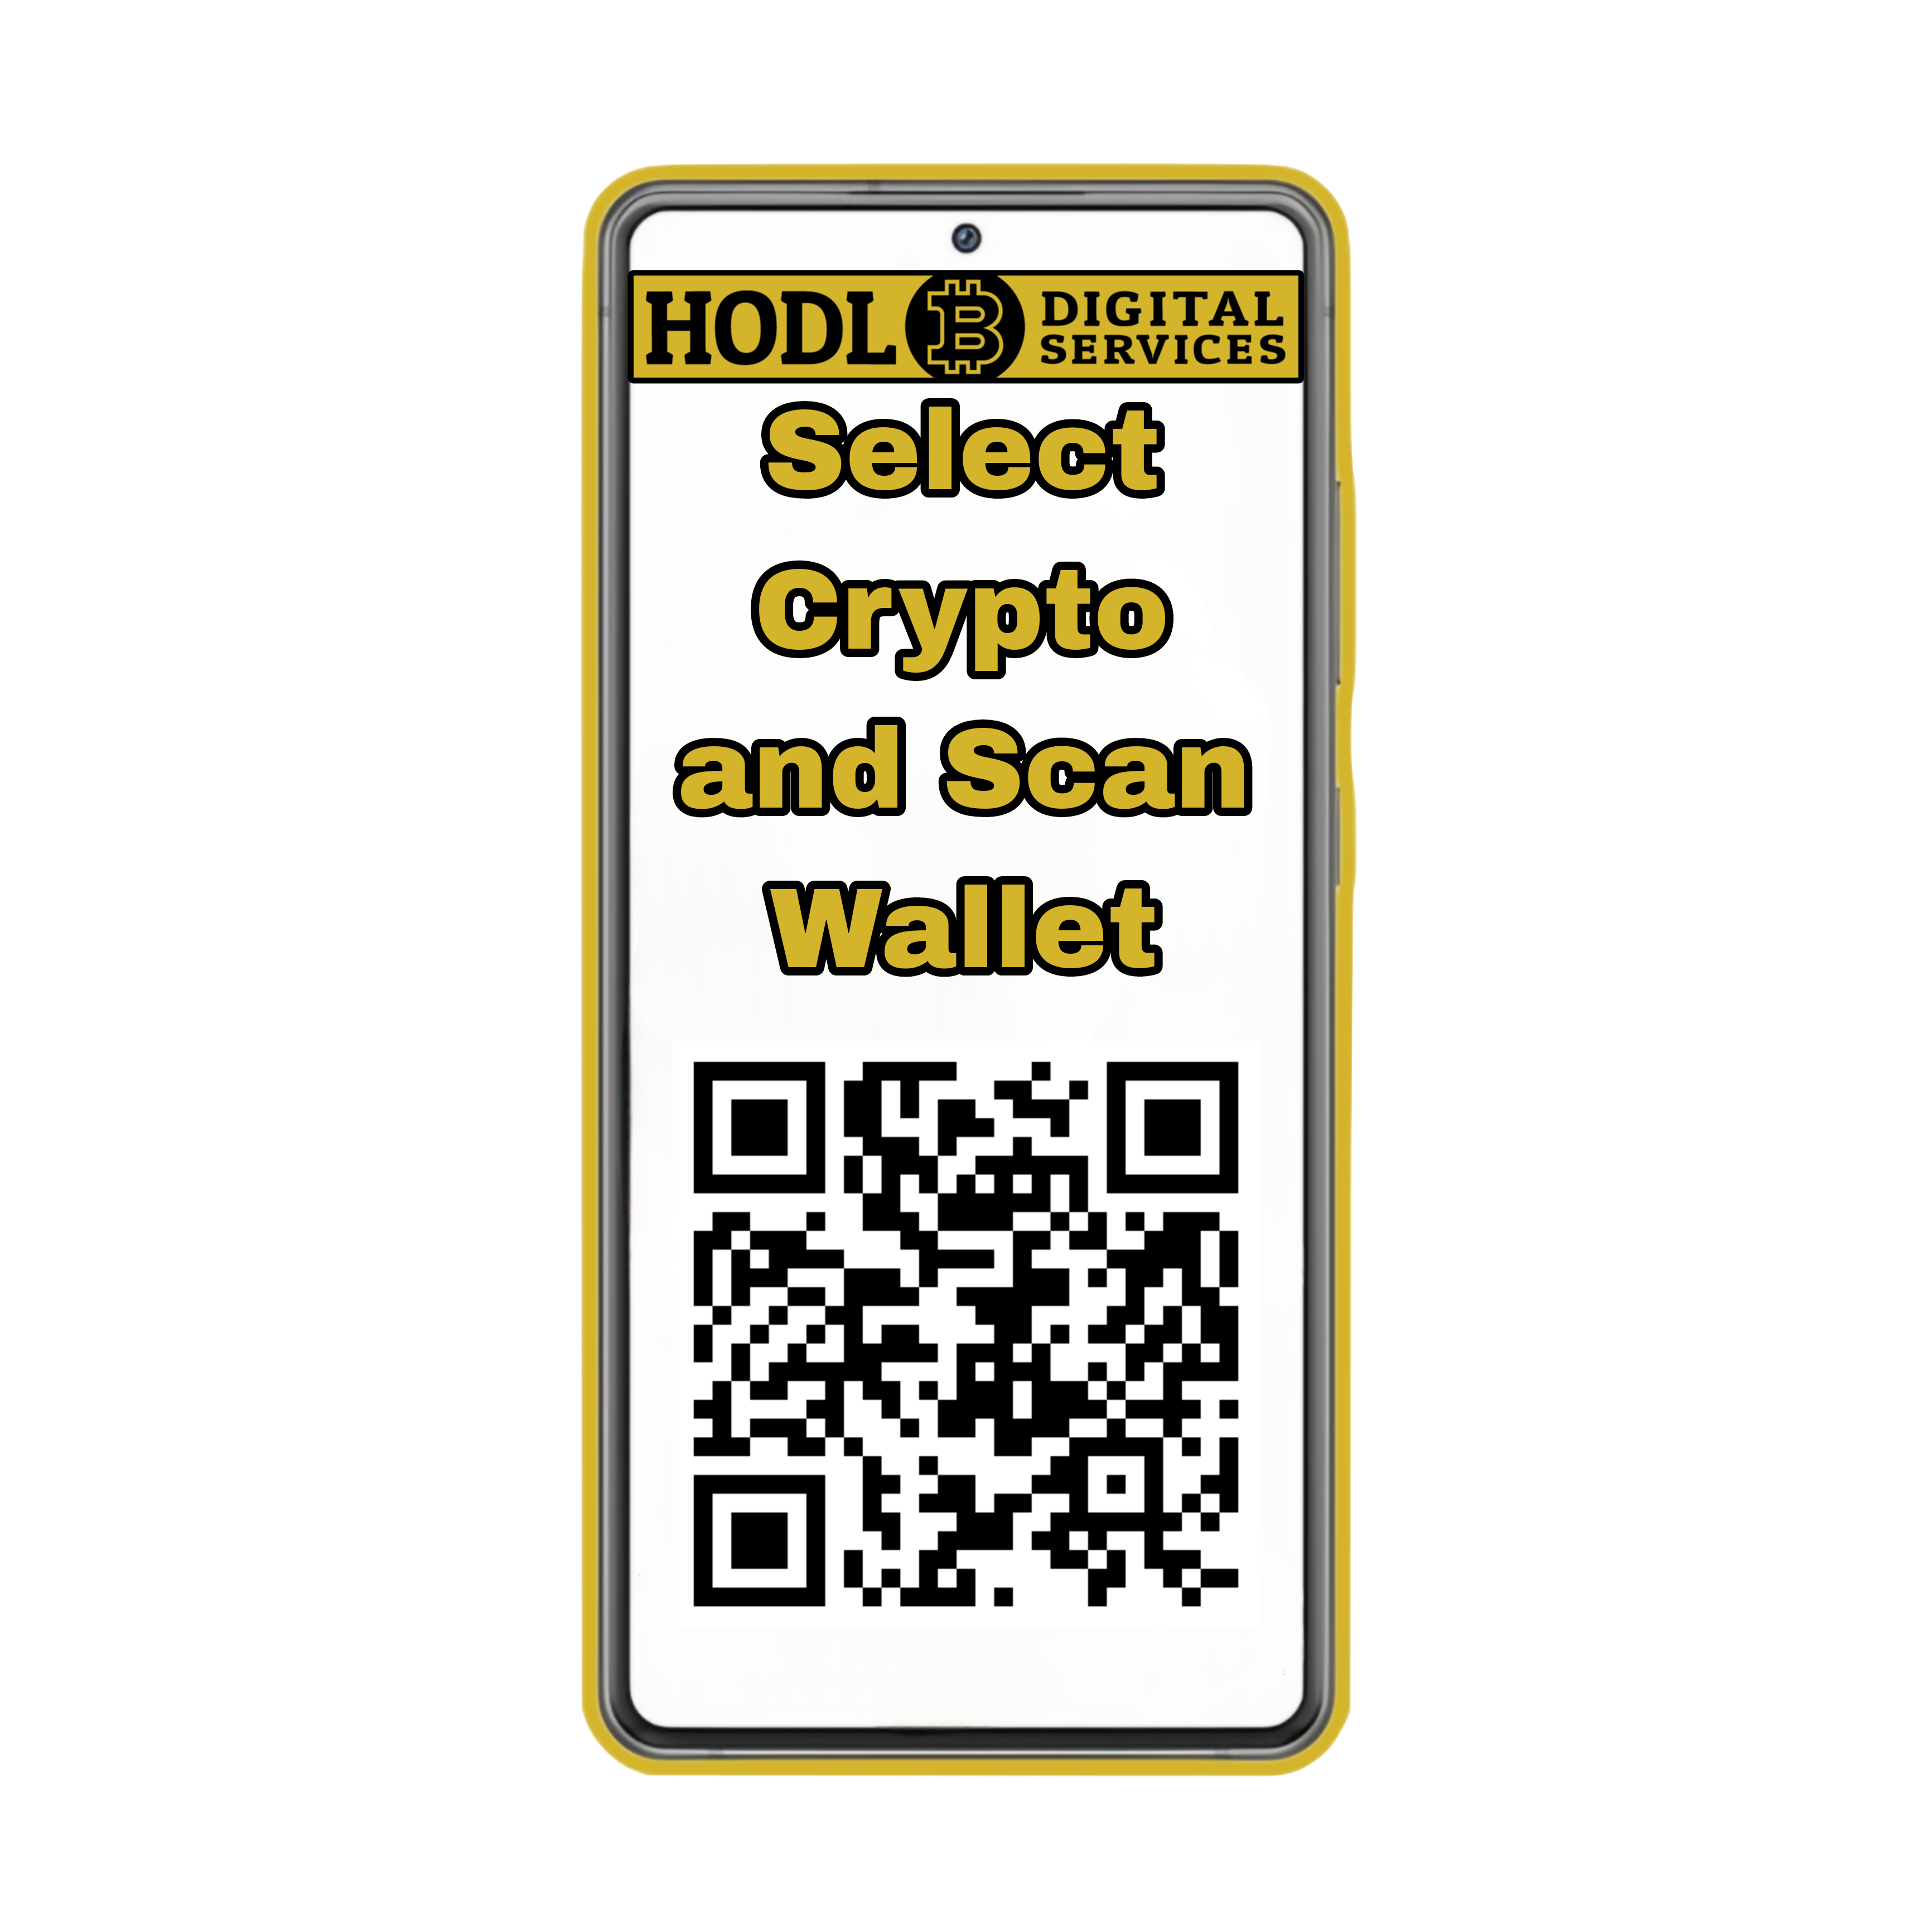 HODL Card – Review, Fees, Functions & Cryptos () | Cryptowisser